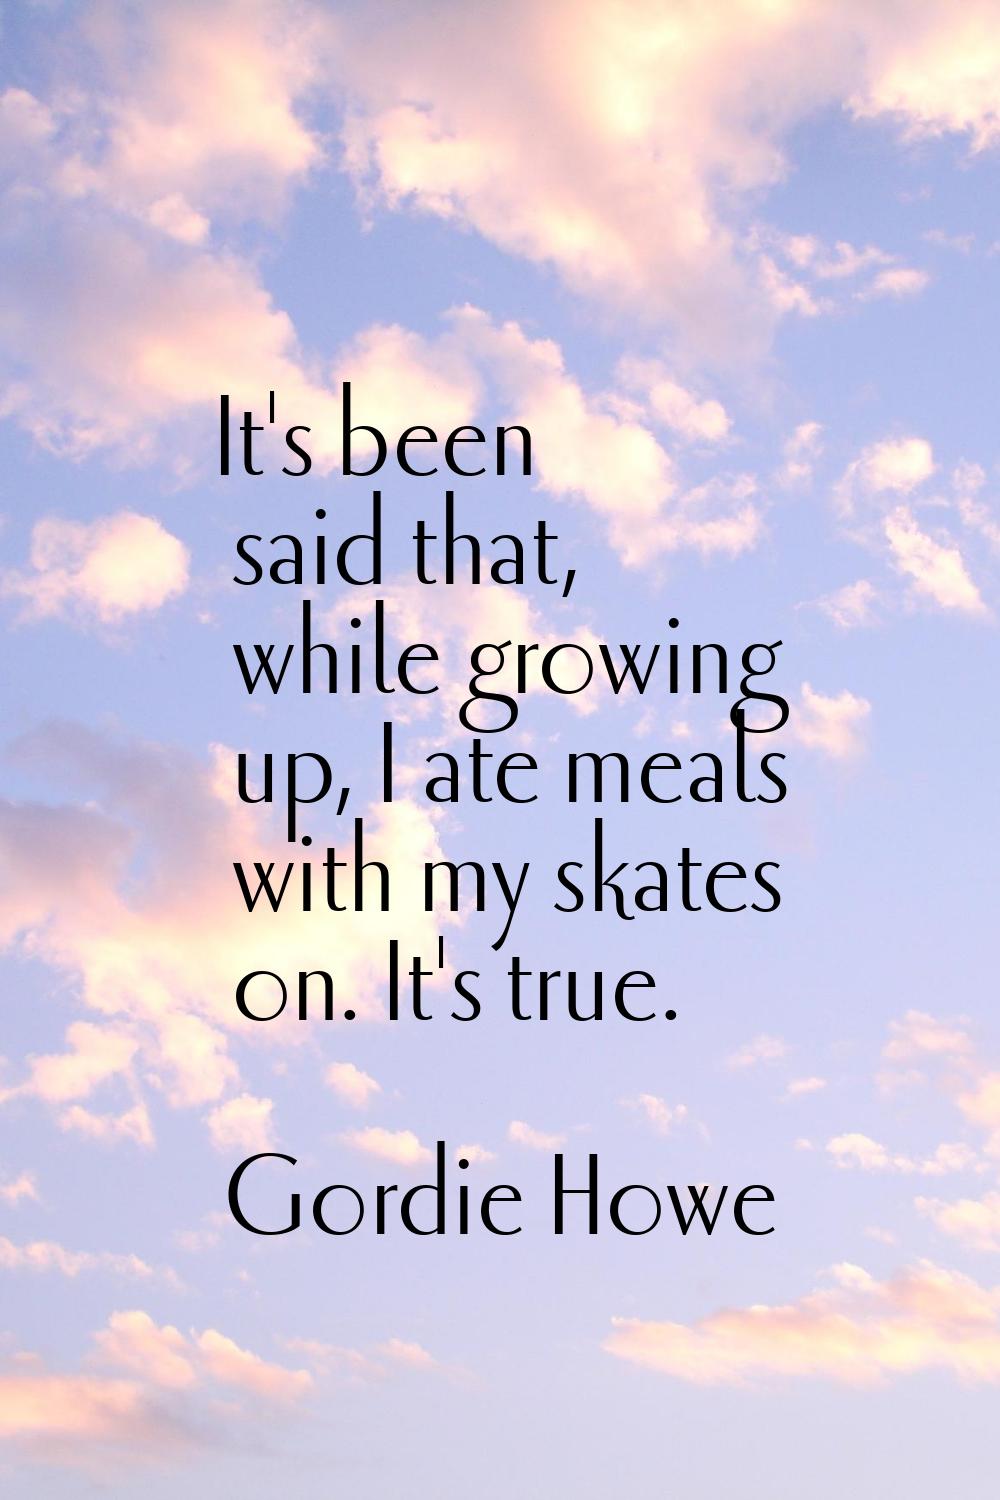 It's been said that, while growing up, I ate meals with my skates on. It's true.